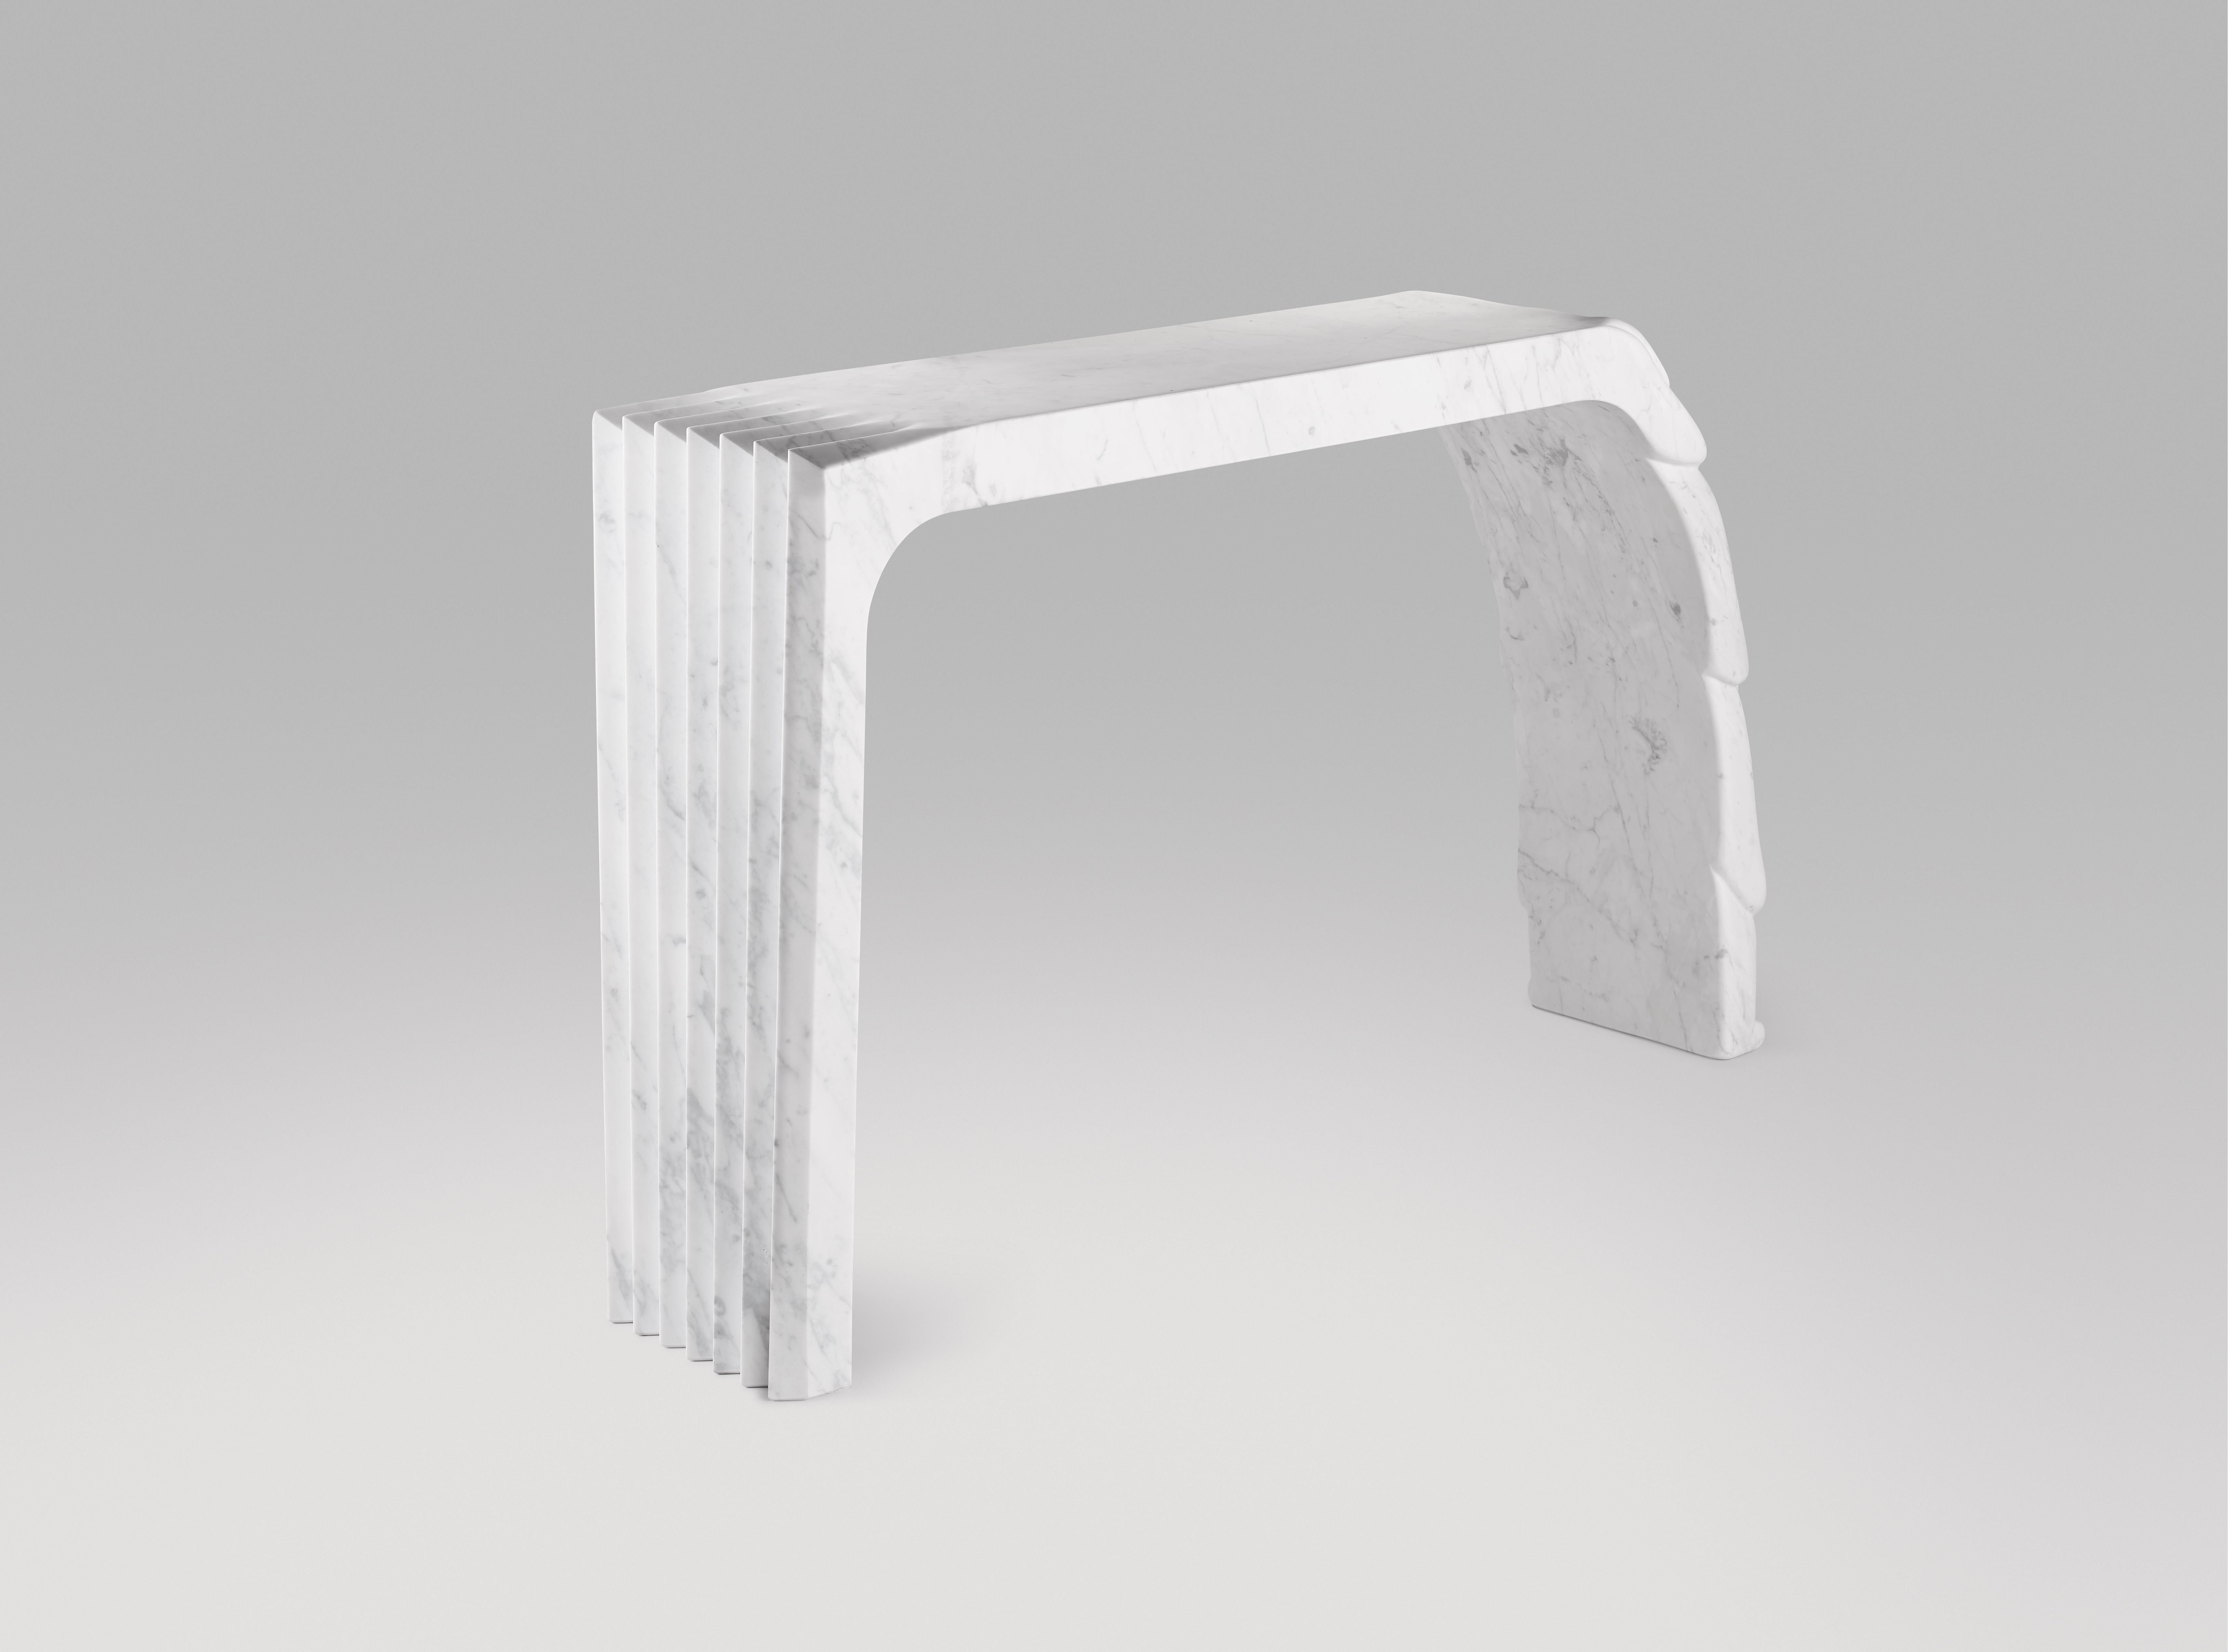 Unique- piece sculptural console engraved from a solid block of Carrara marble.
The evolution from sharp hedgy shapes (left side) to smooth round melting material  (right side).